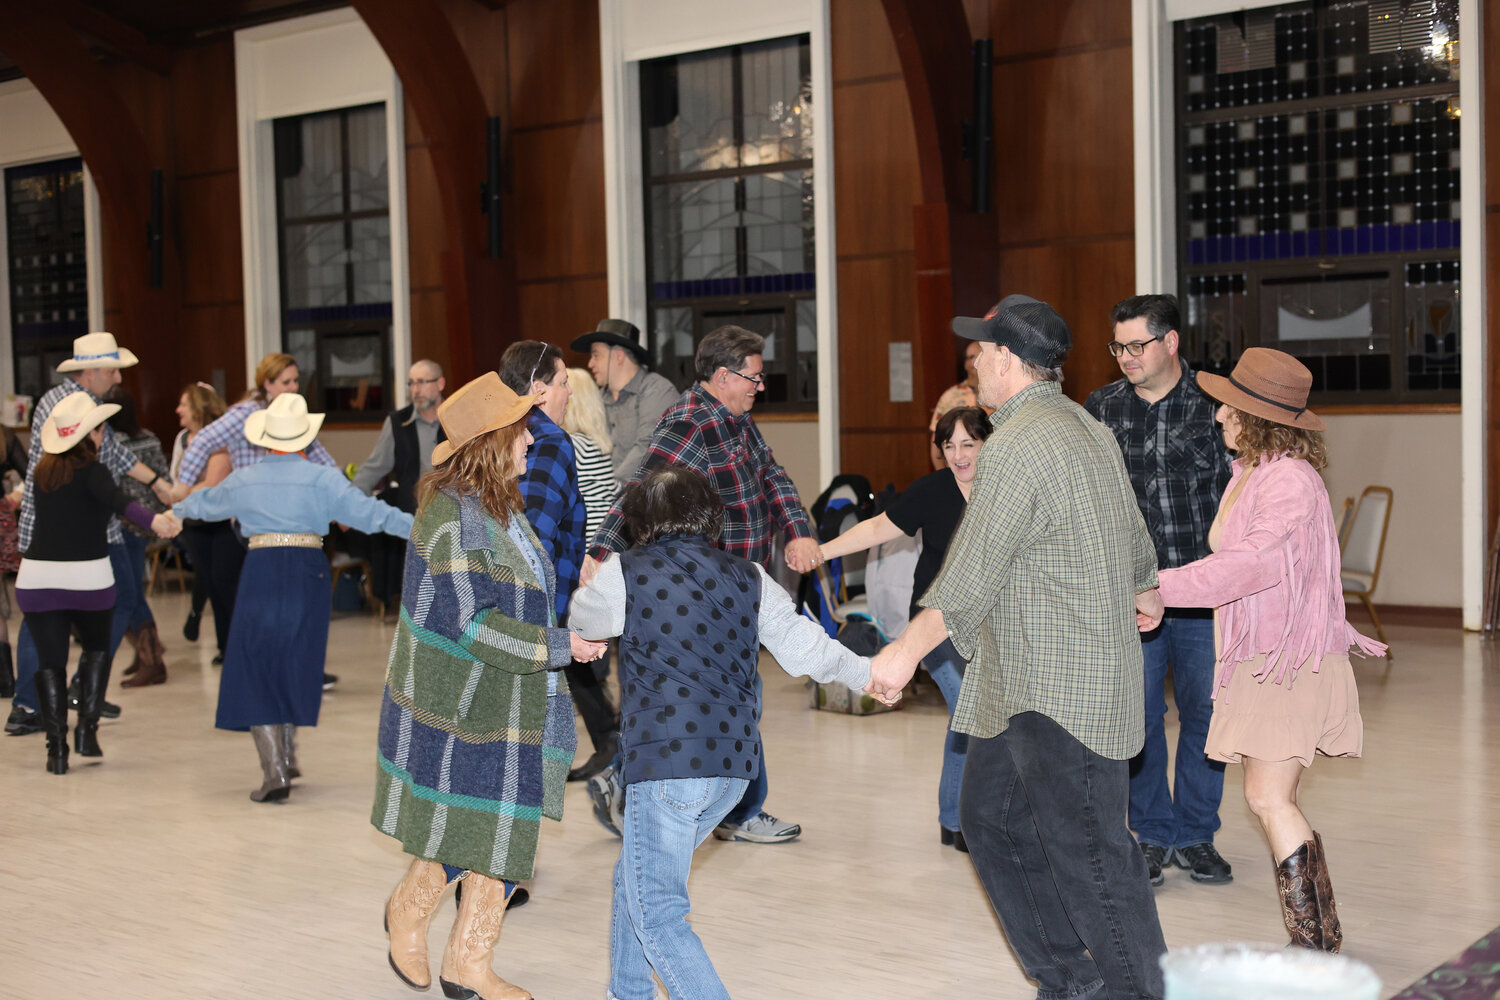 Over 120 attendees enjoyed a hot buffet dinner before hitting the floor to show off their moves at the square and line dance.